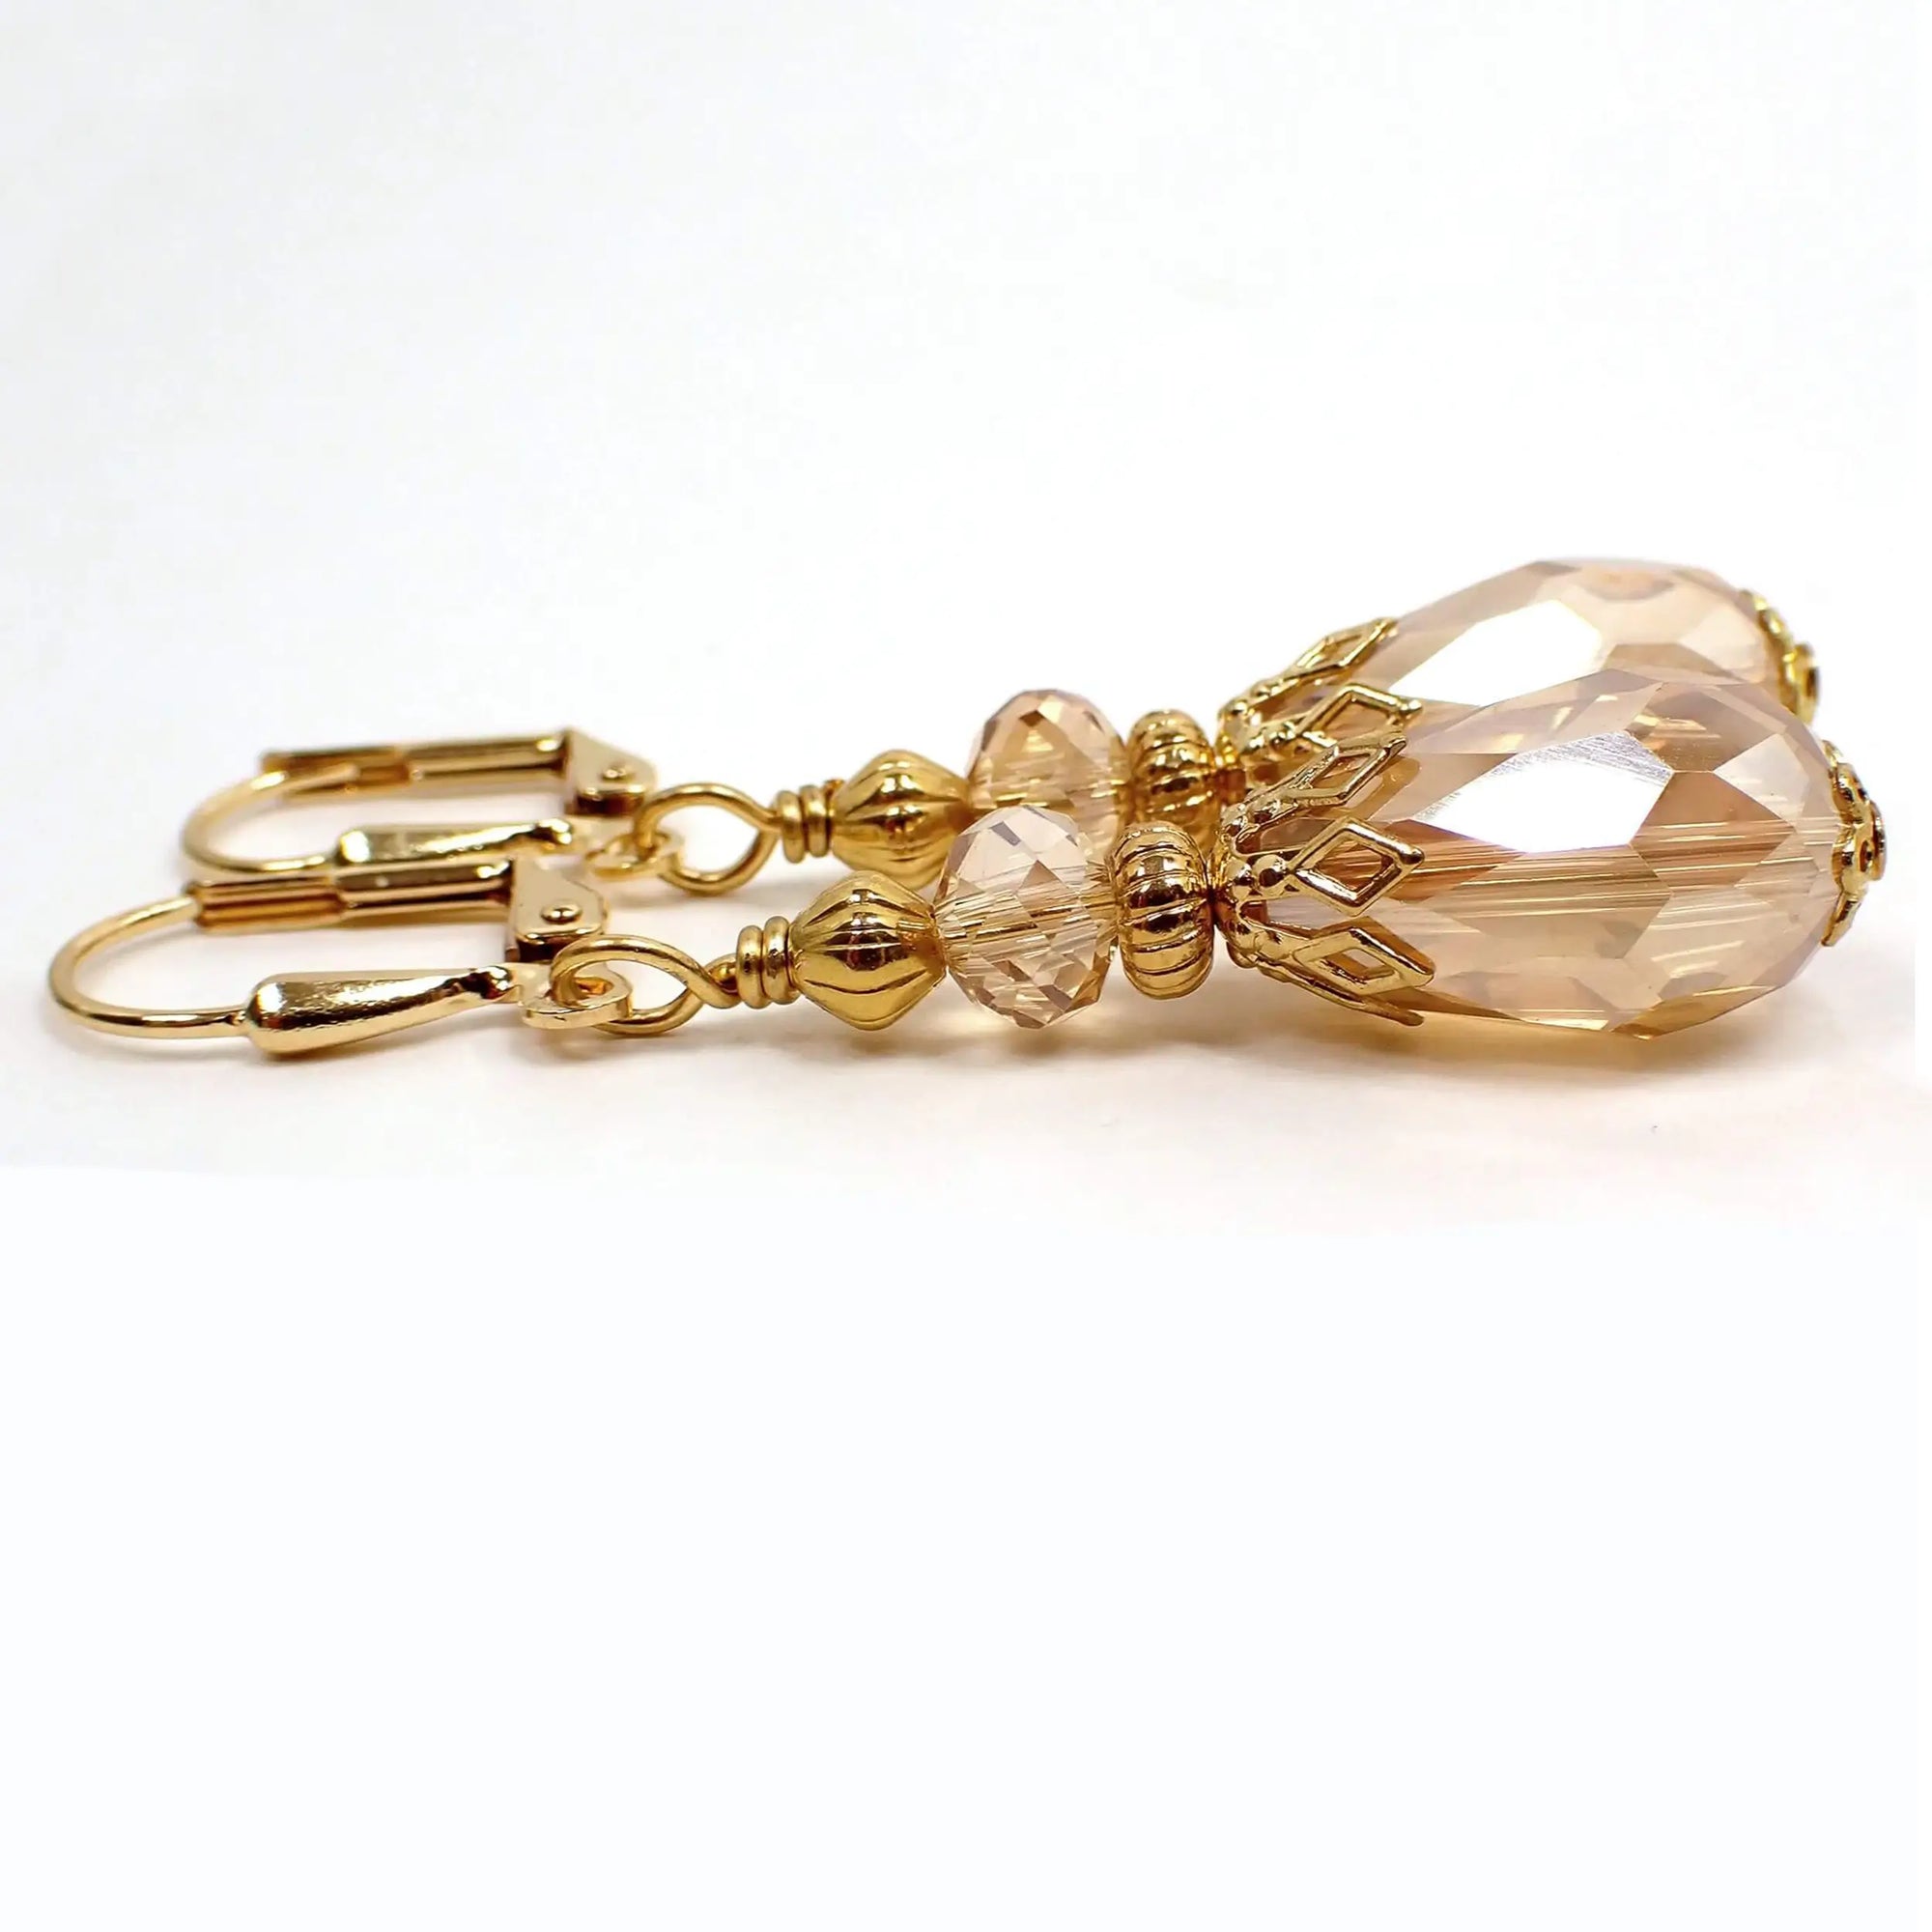 Side view of the vintage style light peach champagne color teardrop earrings. The metal is gold plated in color. There is a faceted glass crystal bead at the top and a faceted glass crystal teardrop bead at the bottom.